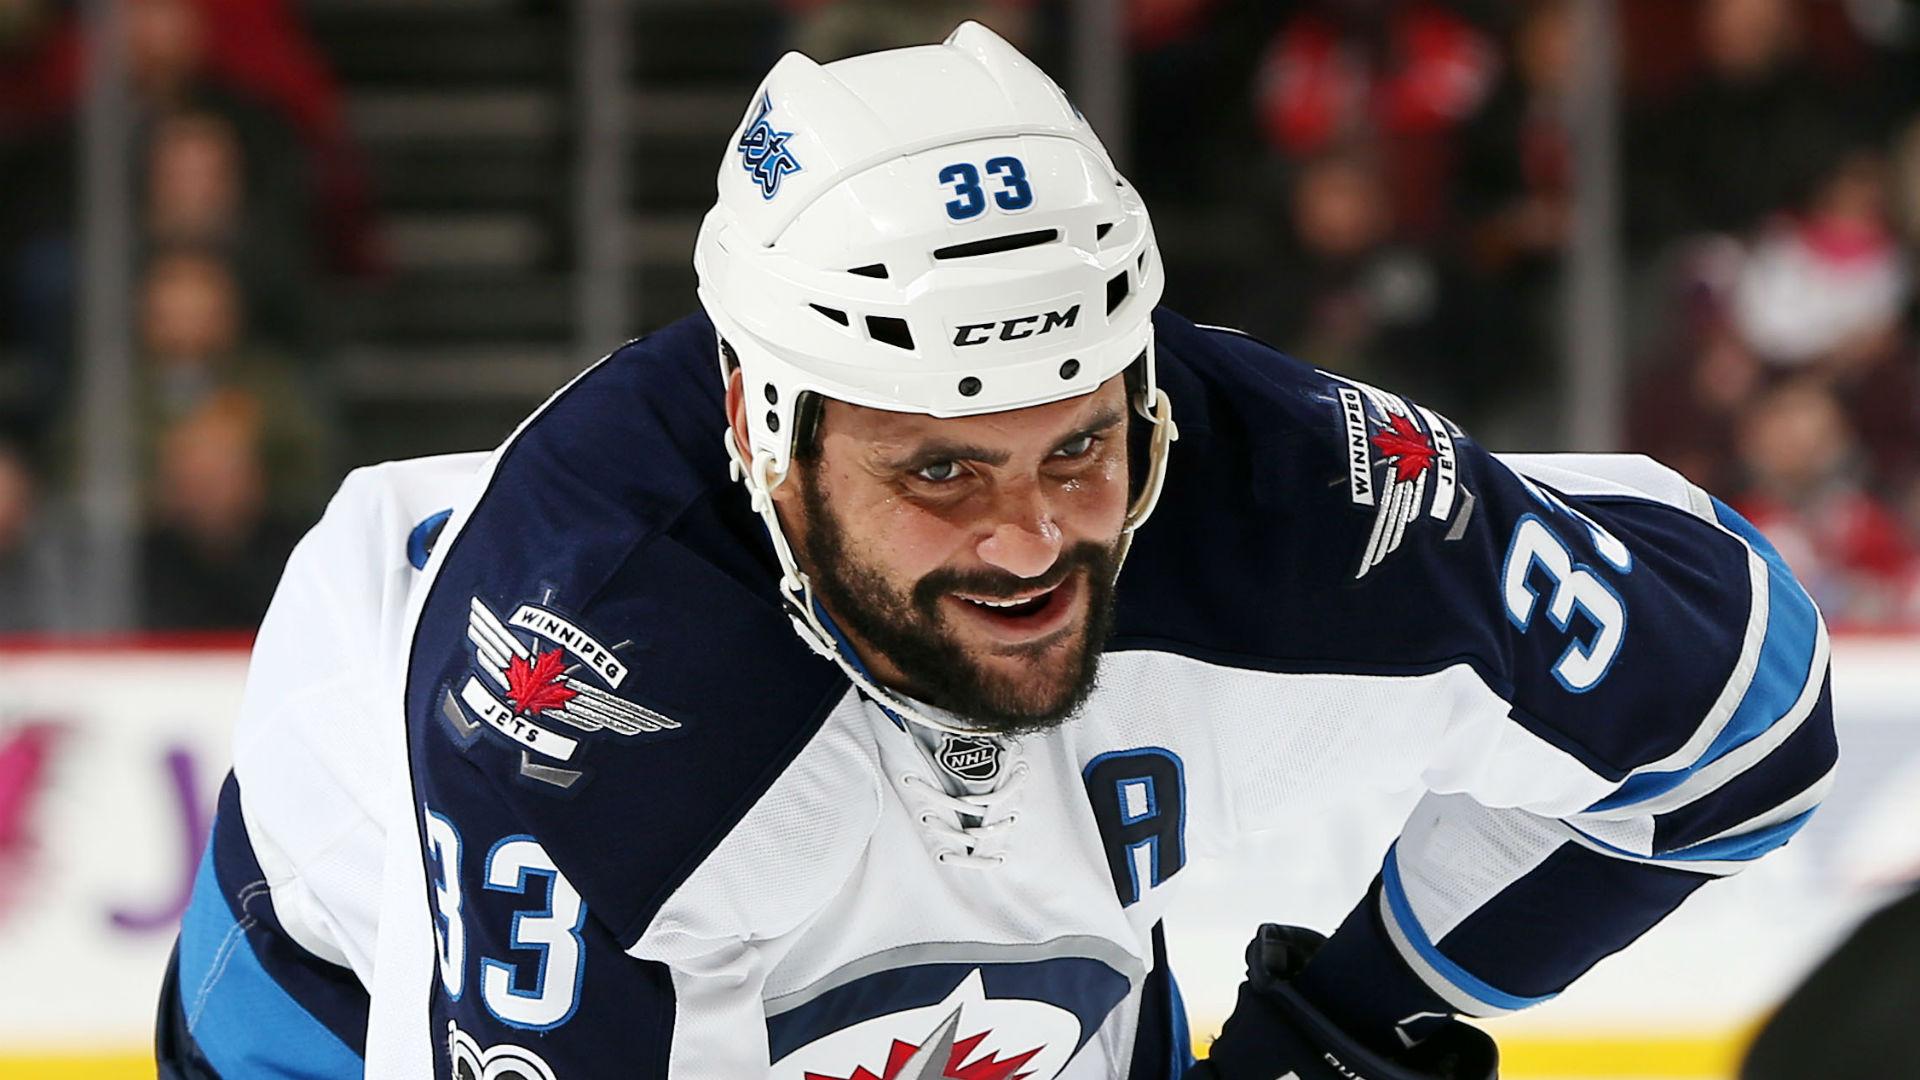 Jets get Dustin Byfuglien back just in time for Stanley Cup playoff